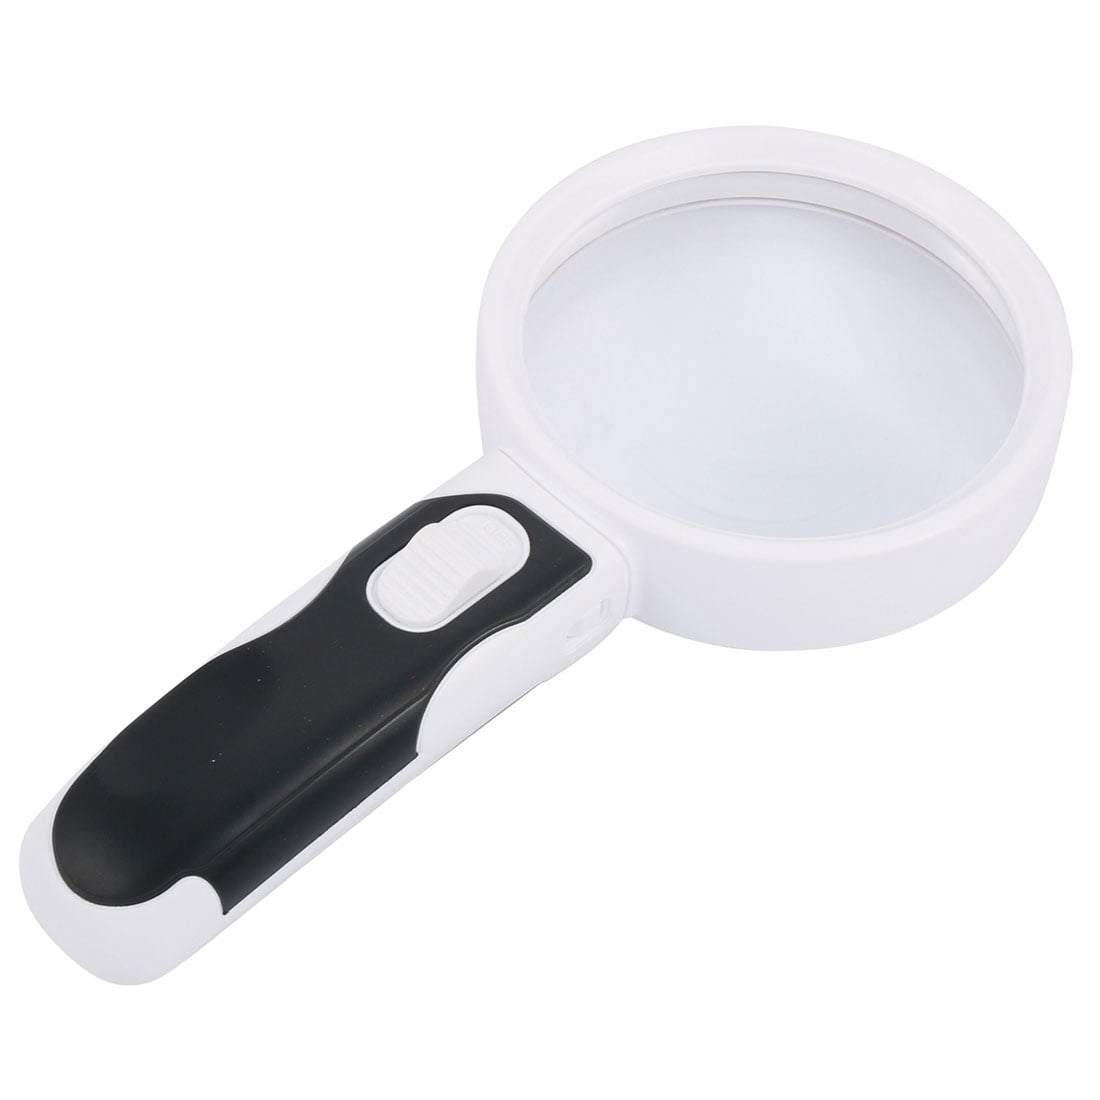 20X Magnification Handheld Reading Magnifier Magnifying Glass Low Vision Aid 